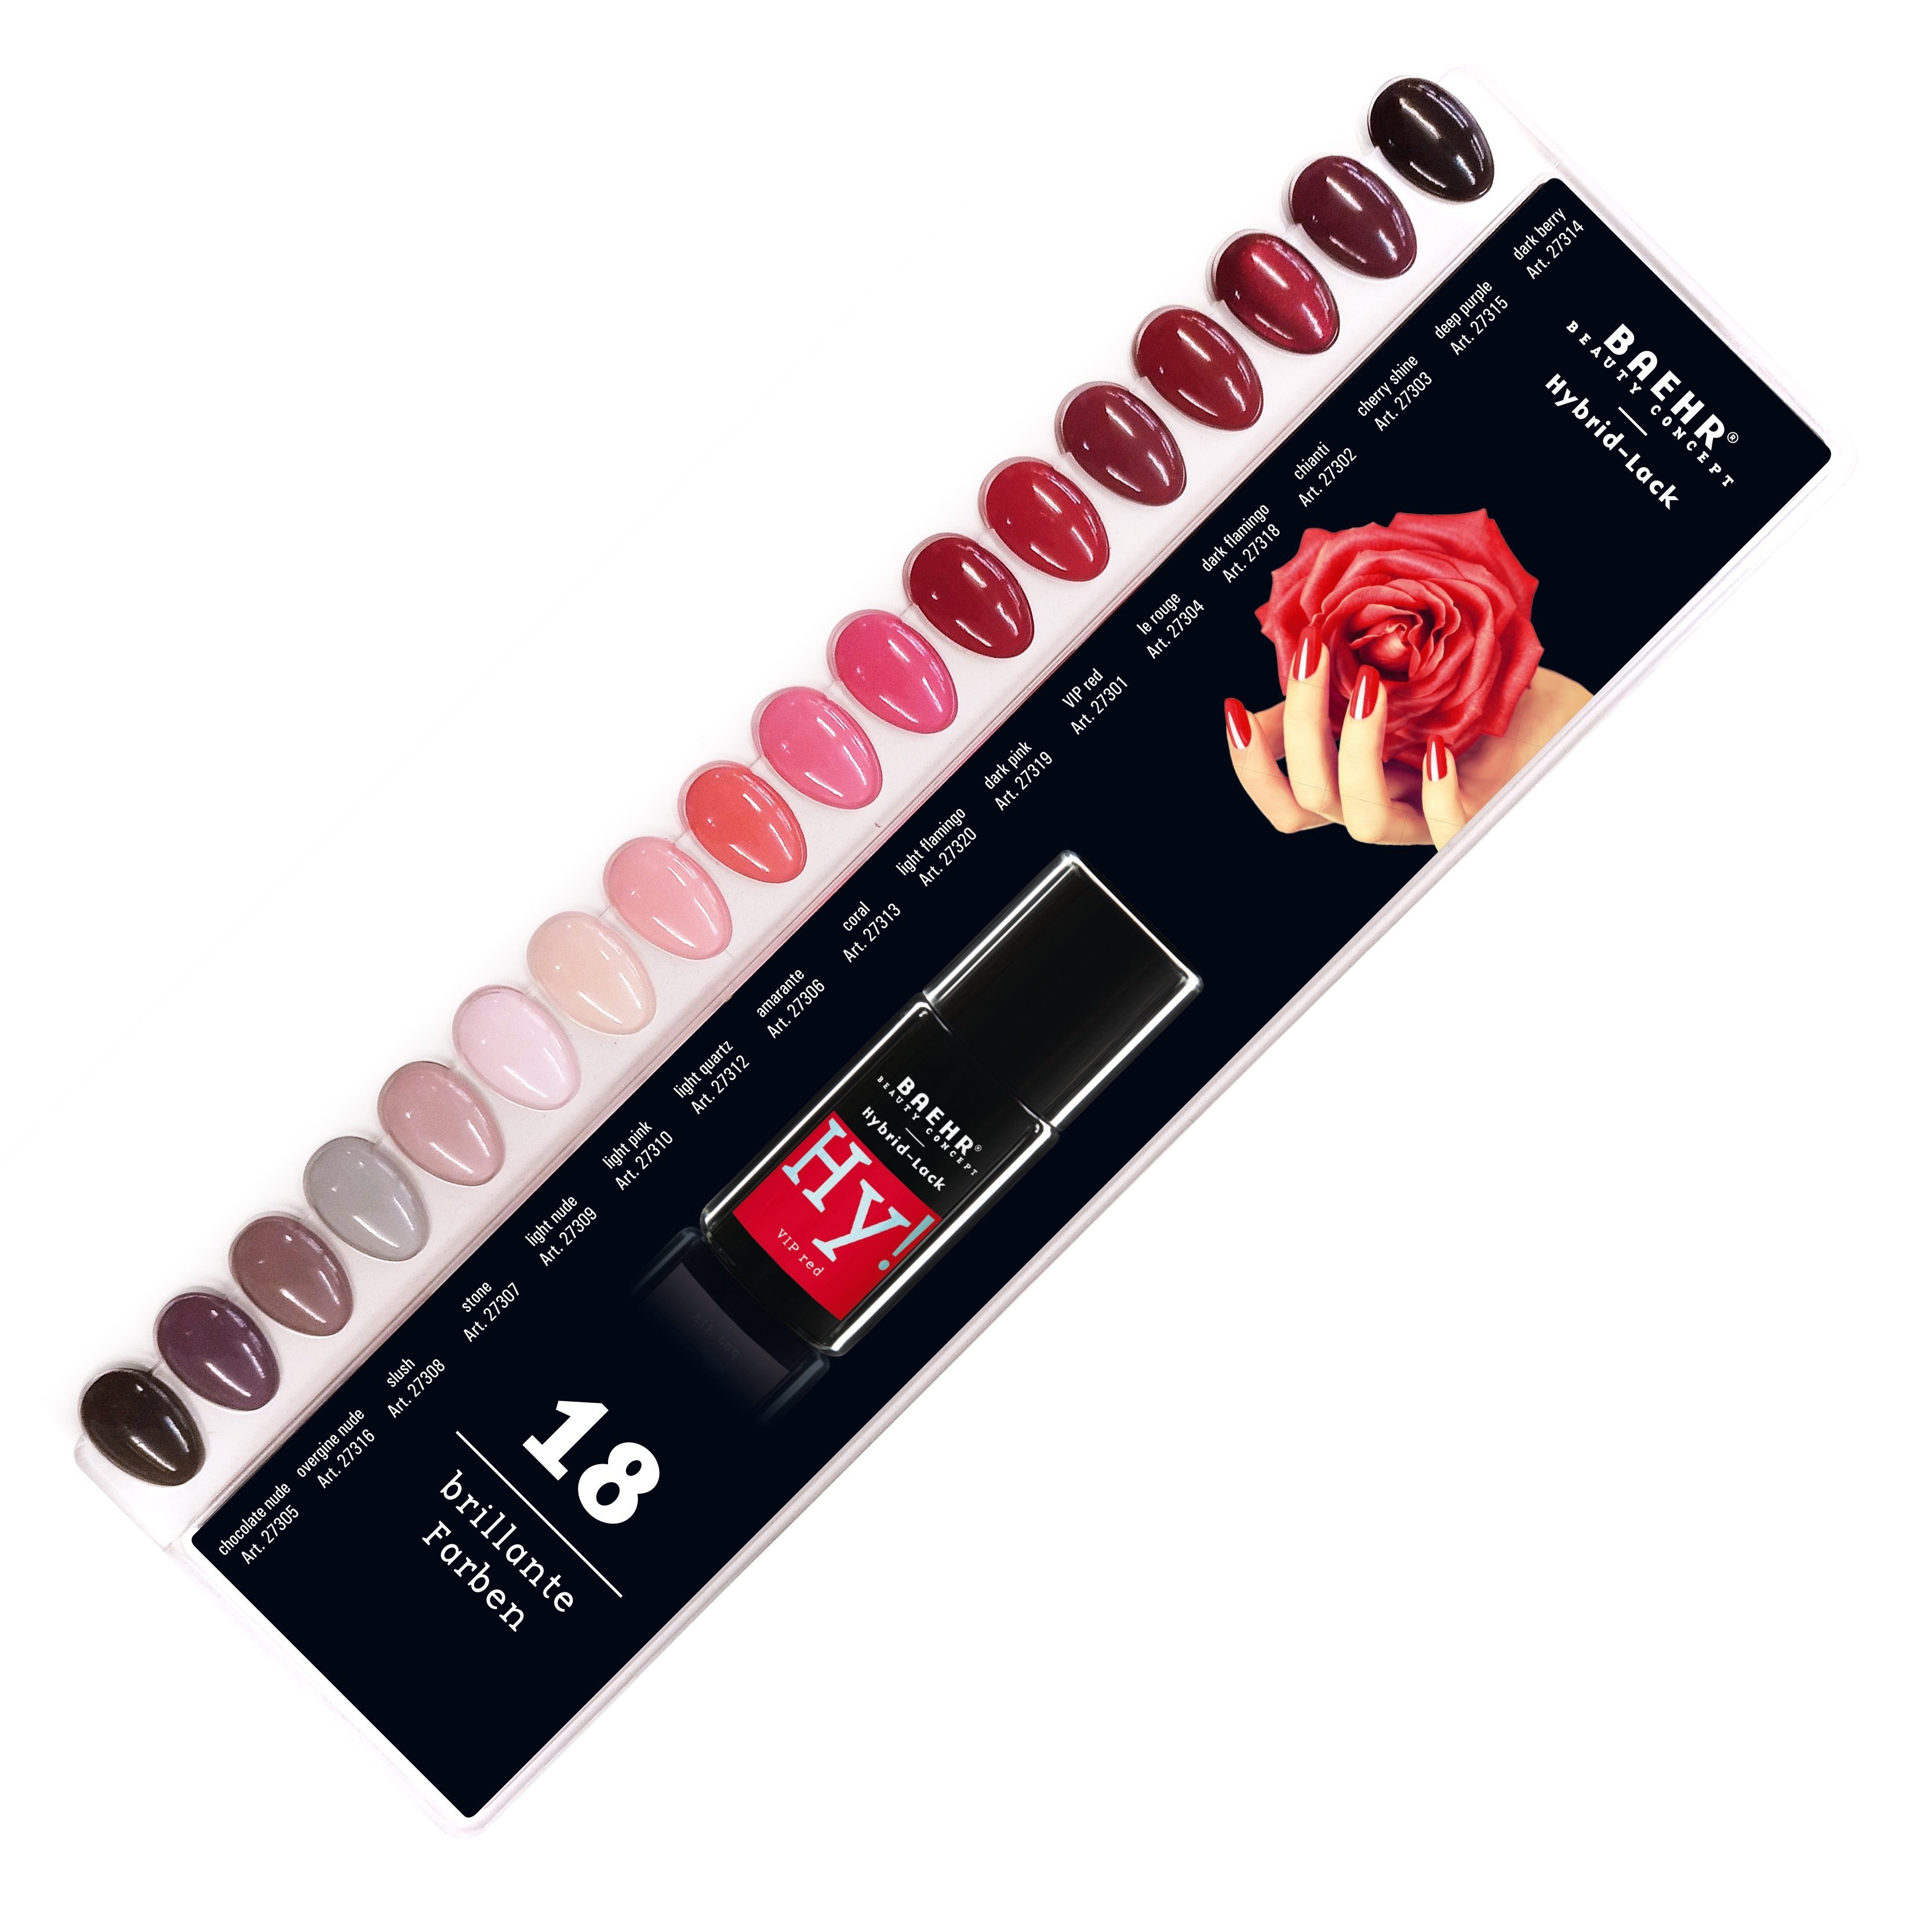 BAEHR BEAUTY CONCEPT - NAILS Hy! Color-Chart 18 Farben